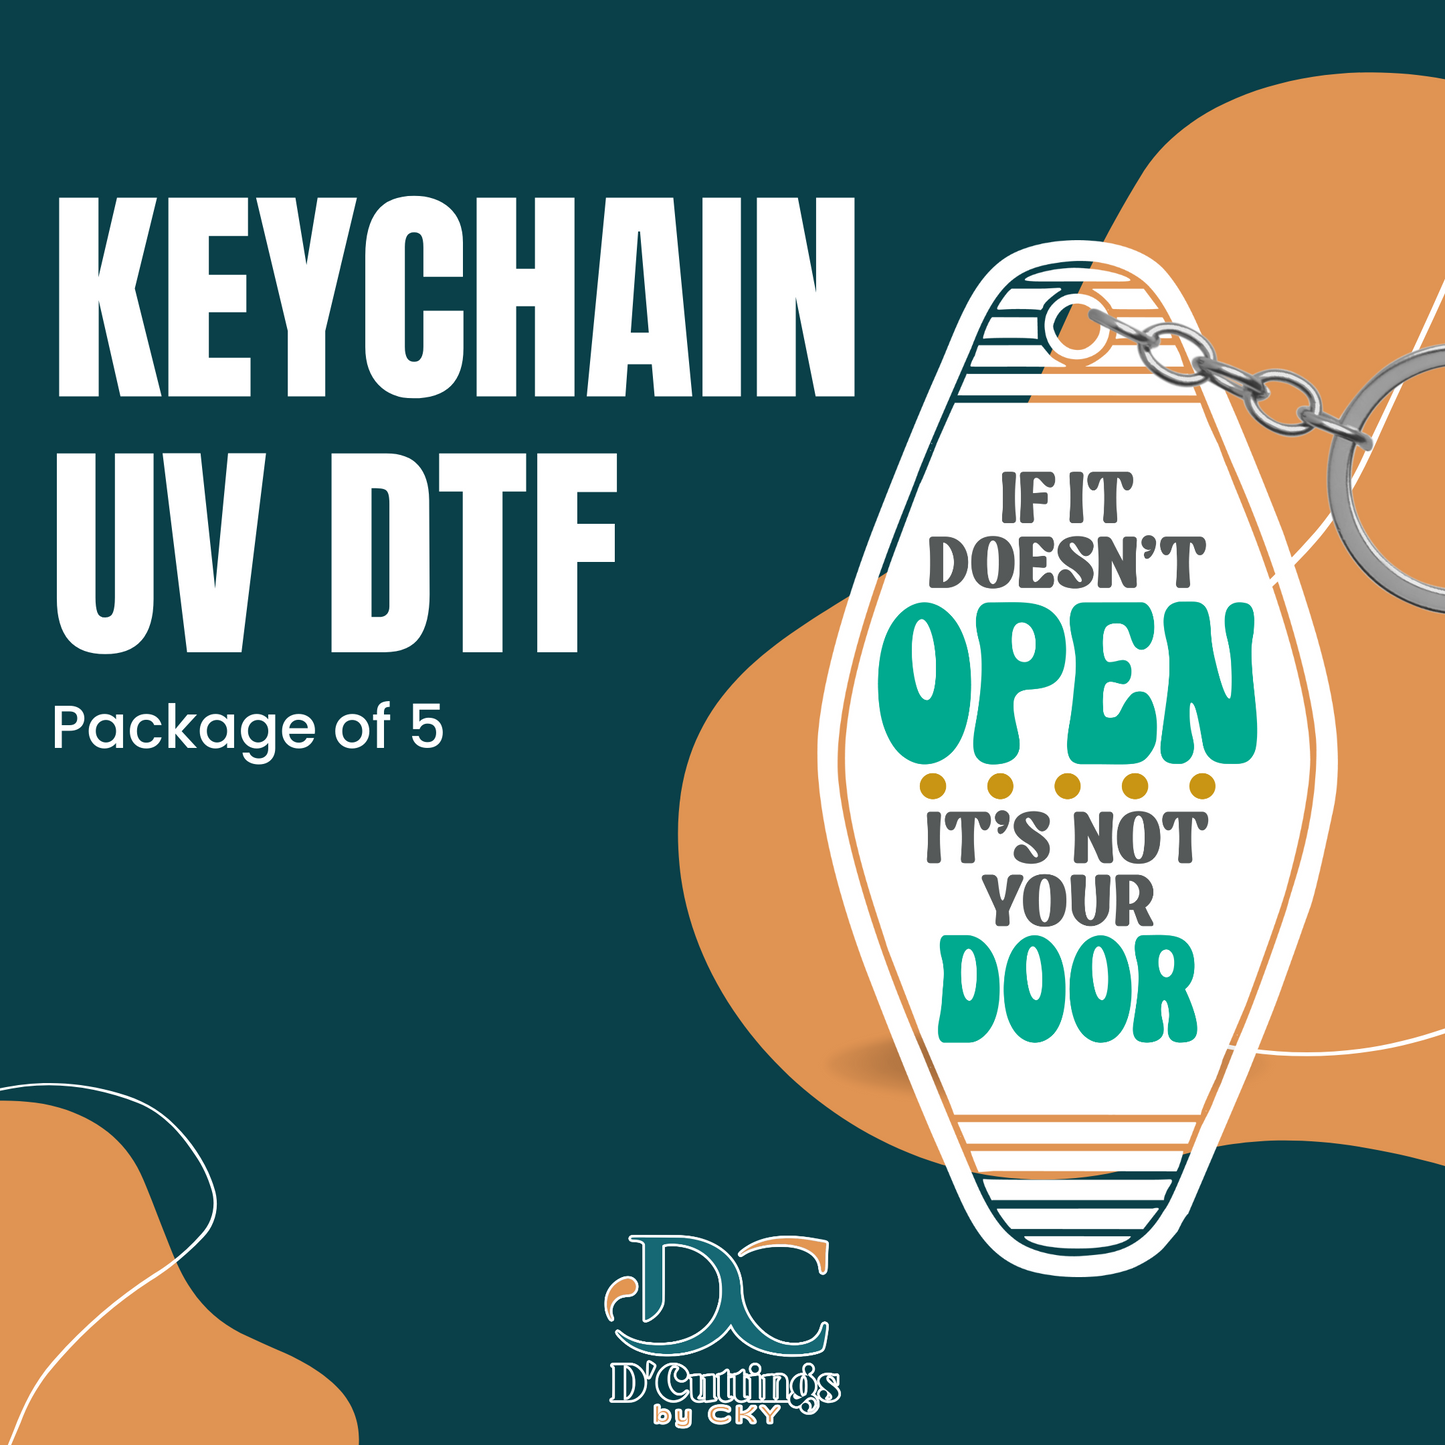 If It Doesn't Open, Its Not Your Door - Keychain UV DTF Decal